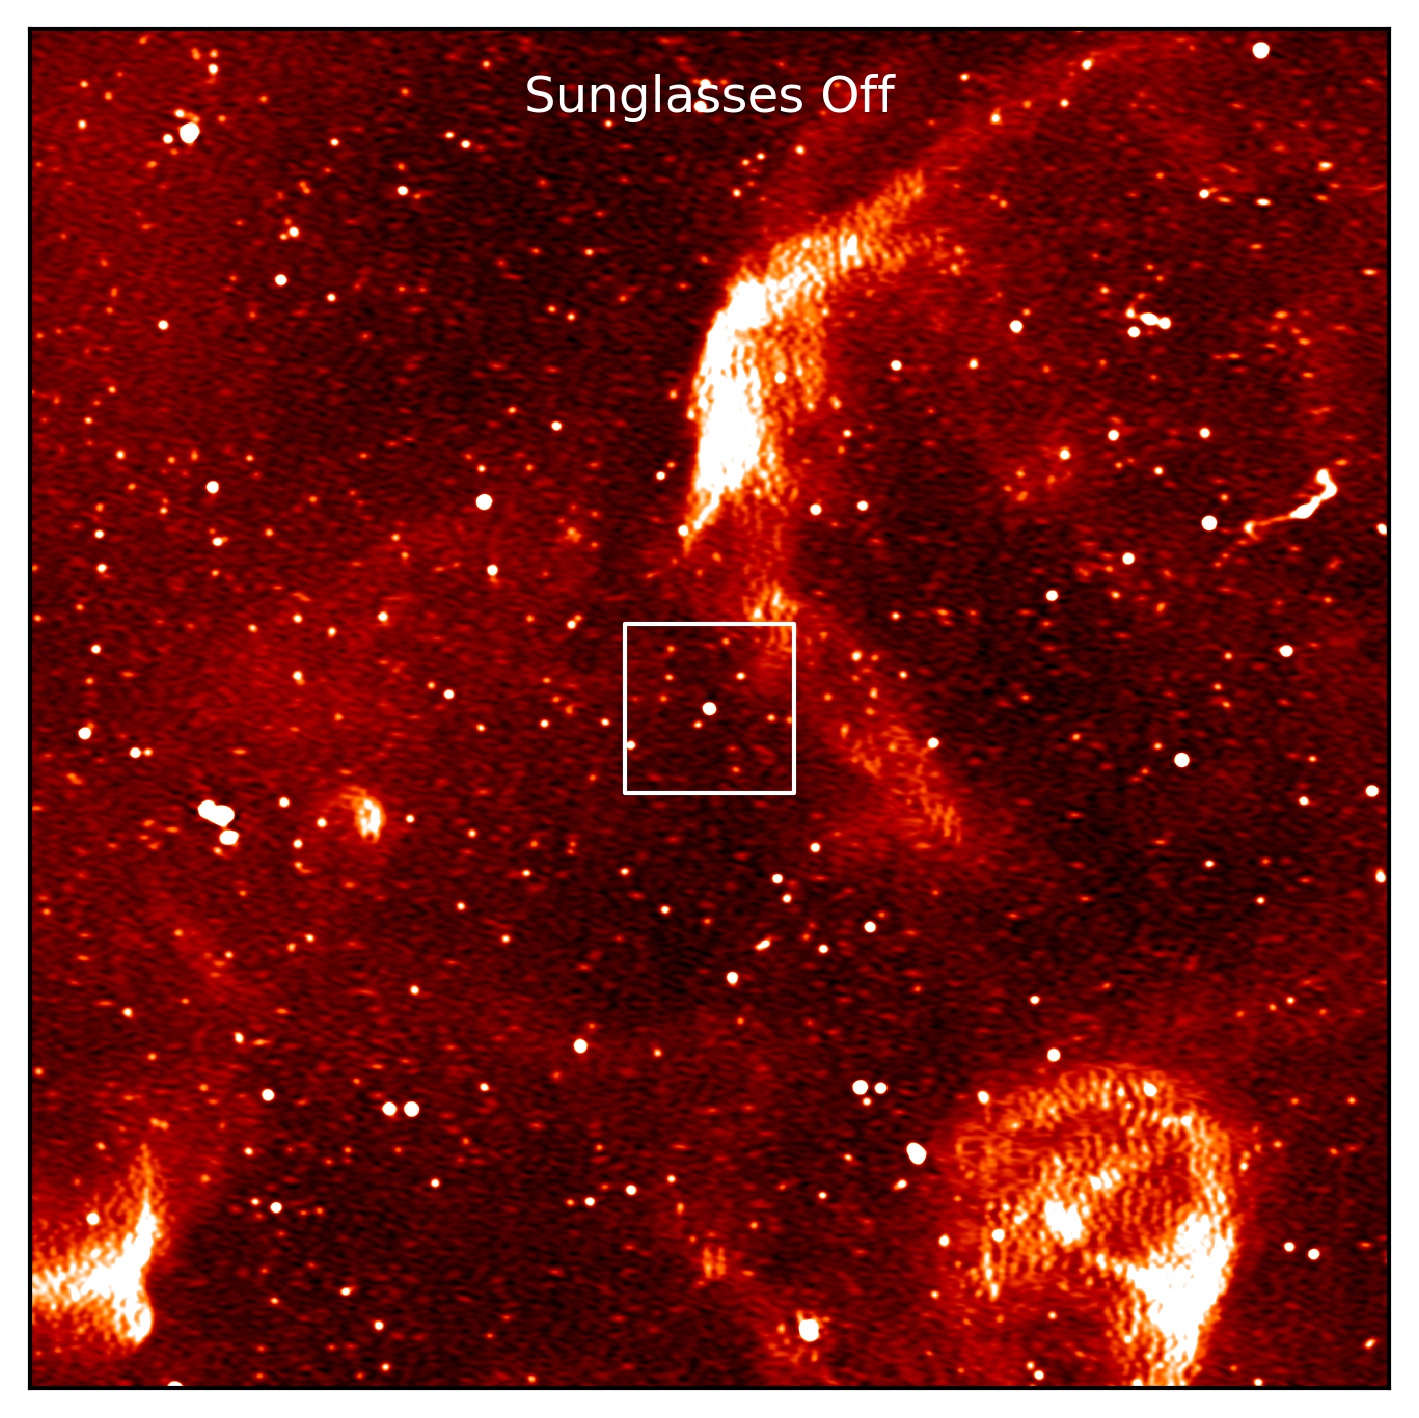 The MeerKAT radio telescope's field of view without 'sunglasses' featuring the new pulsar